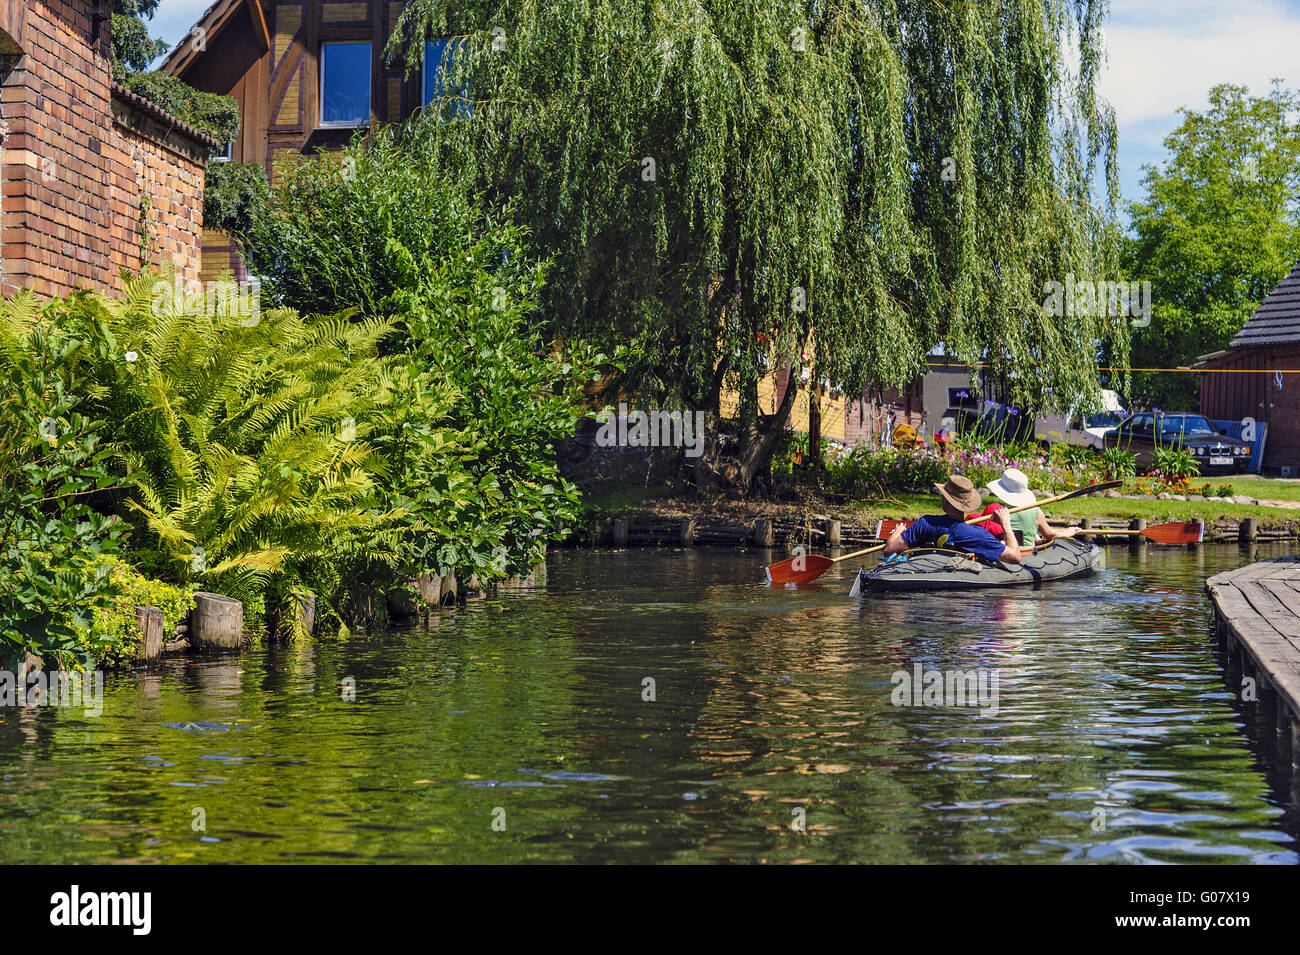 Paddle boat with 2 people in the Spreewald village Stock Photo